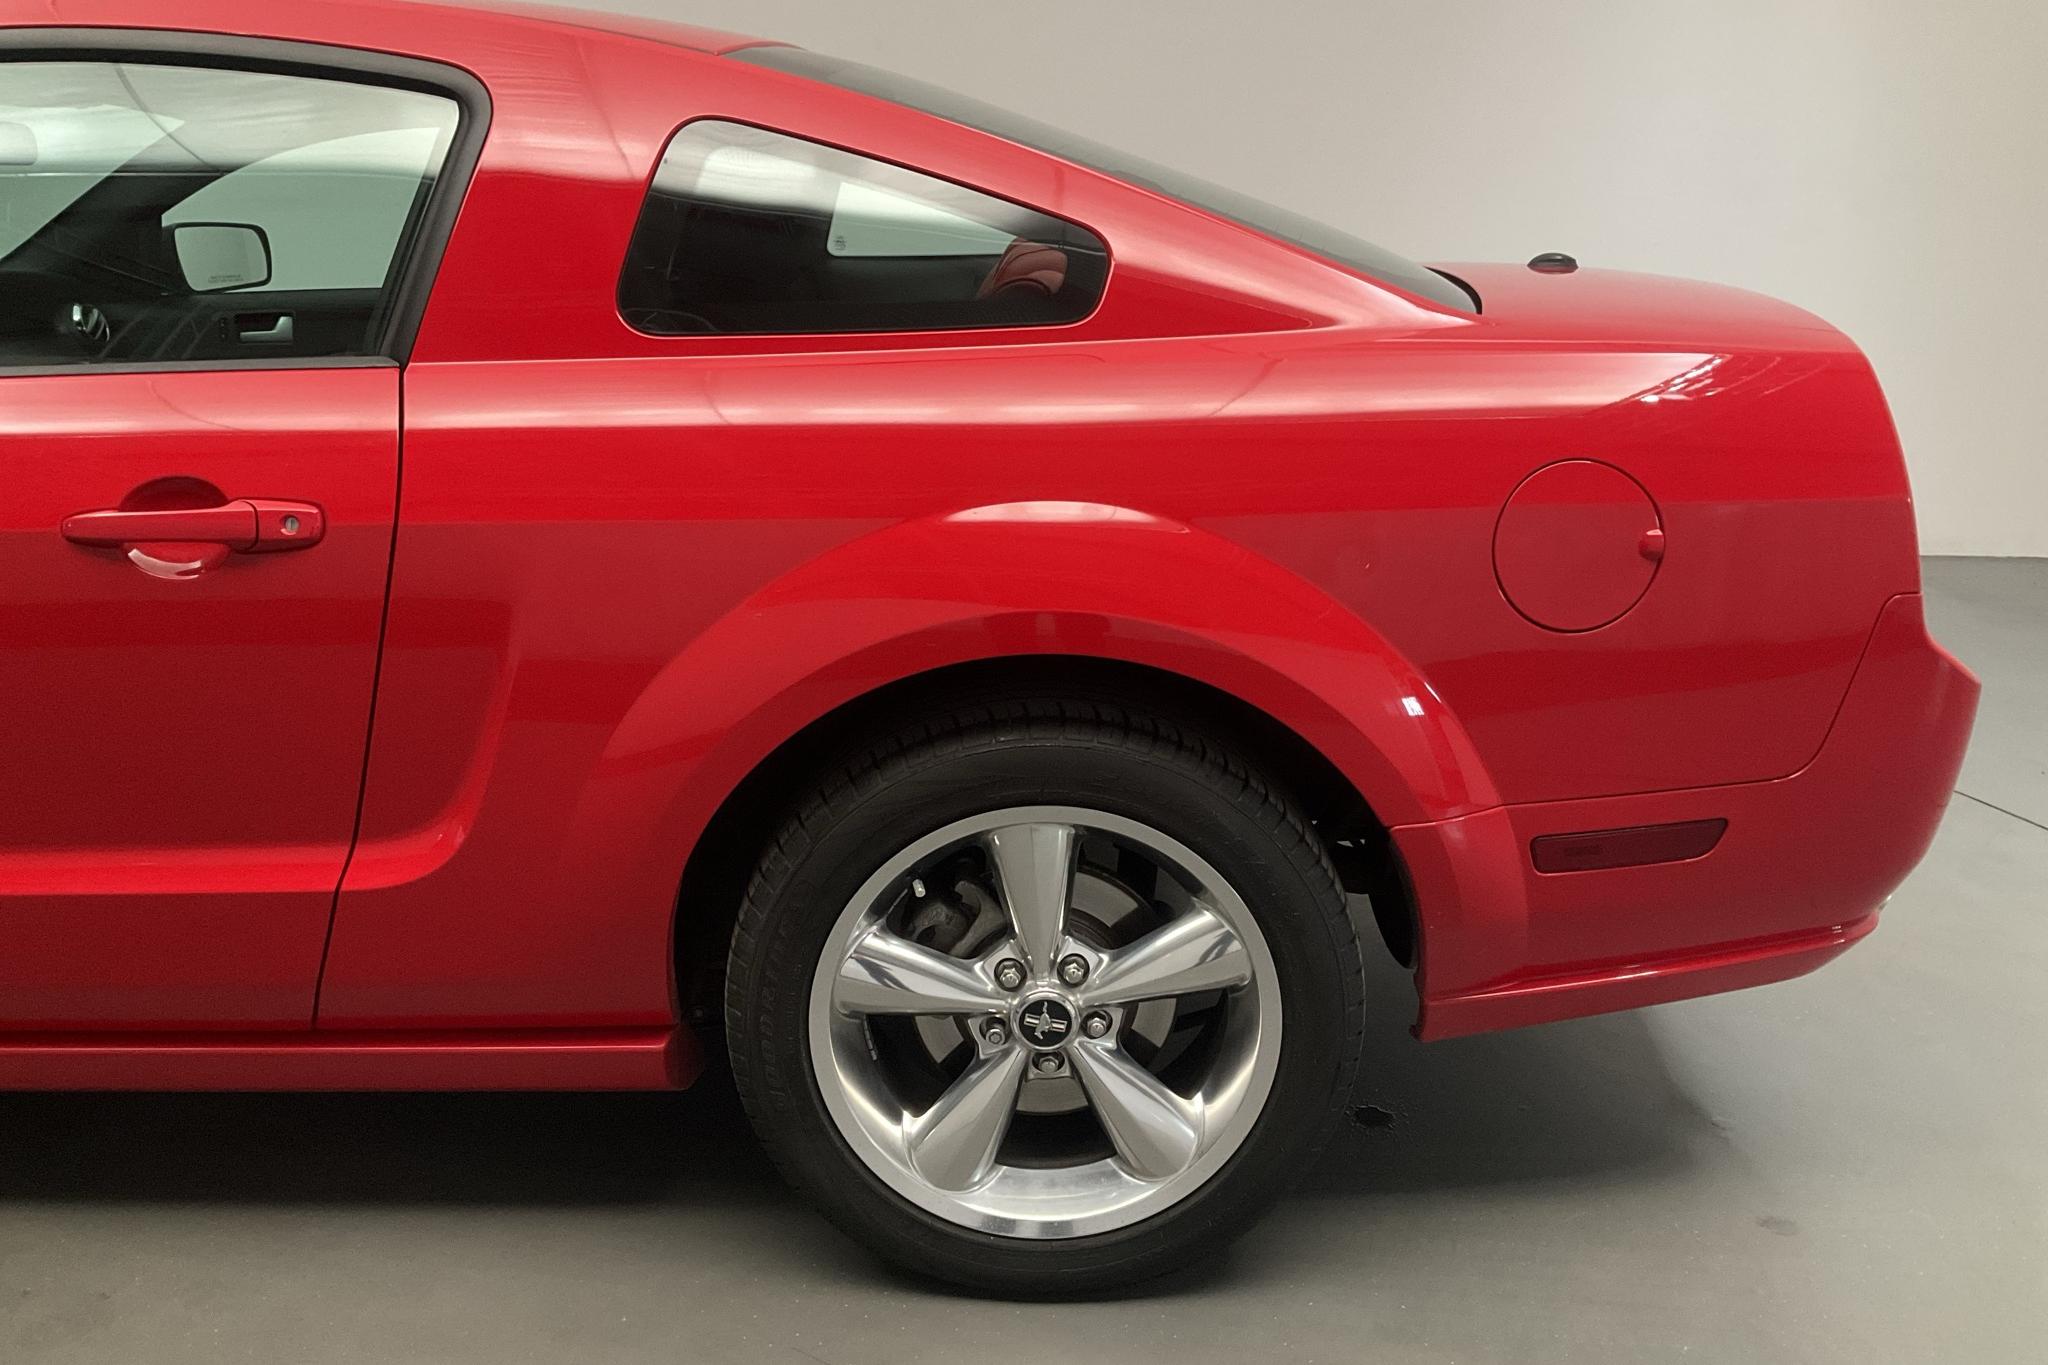 Ford Mustang GT 4.6 V8 Coupé (300hk) - 57 480 km - Manual - red - 2007